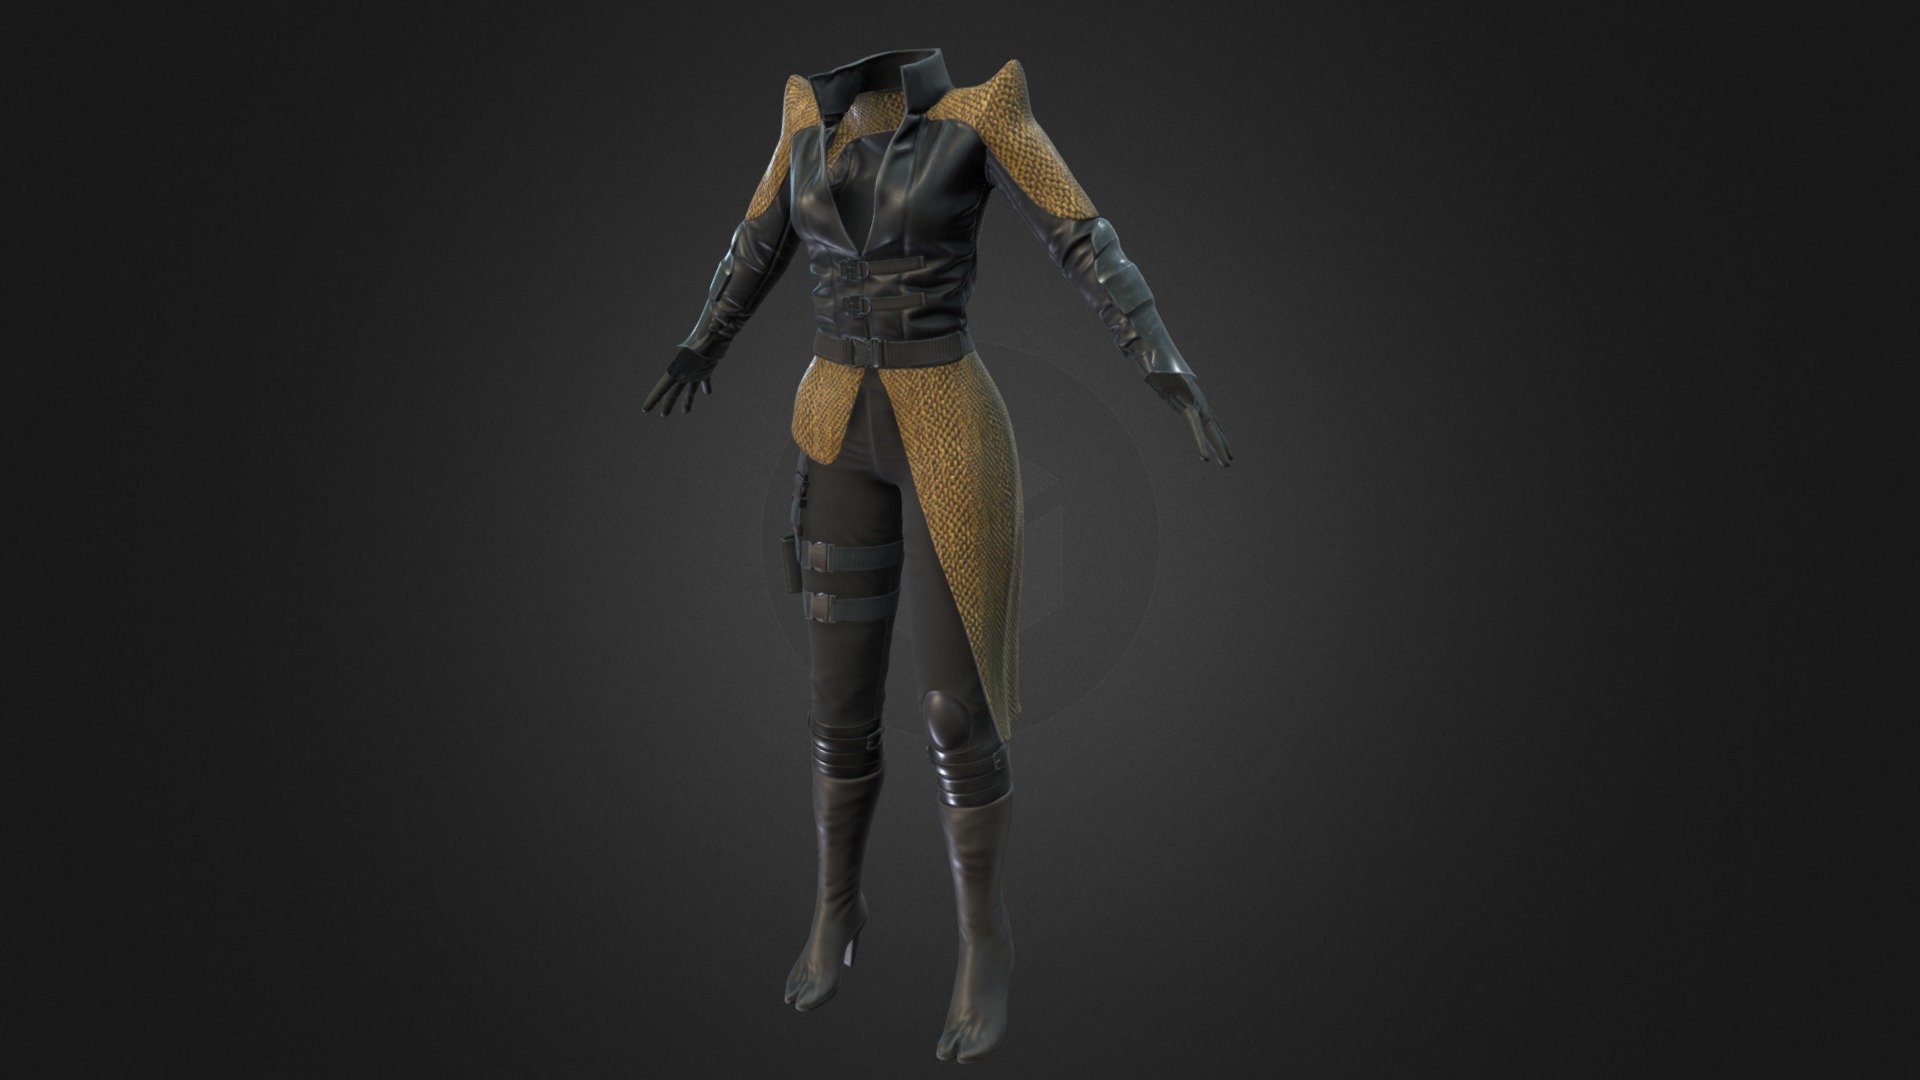 Sci-fi female outfit 3D Model in Clothing 3DExport